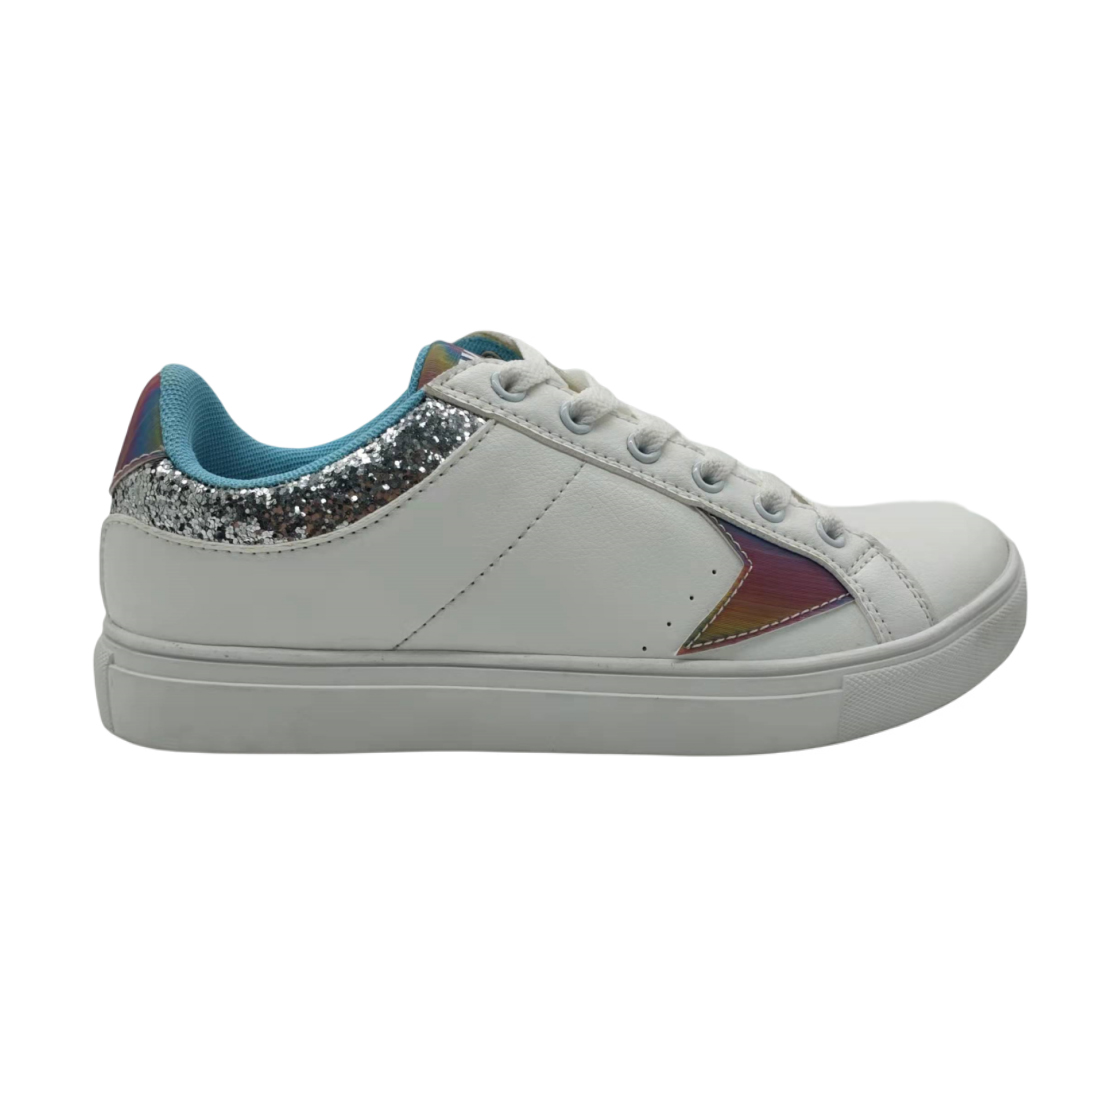 Trendy & Fancy Look Boarding Shoes With Nice Color Combination Upper & Tpr Outsole (4)